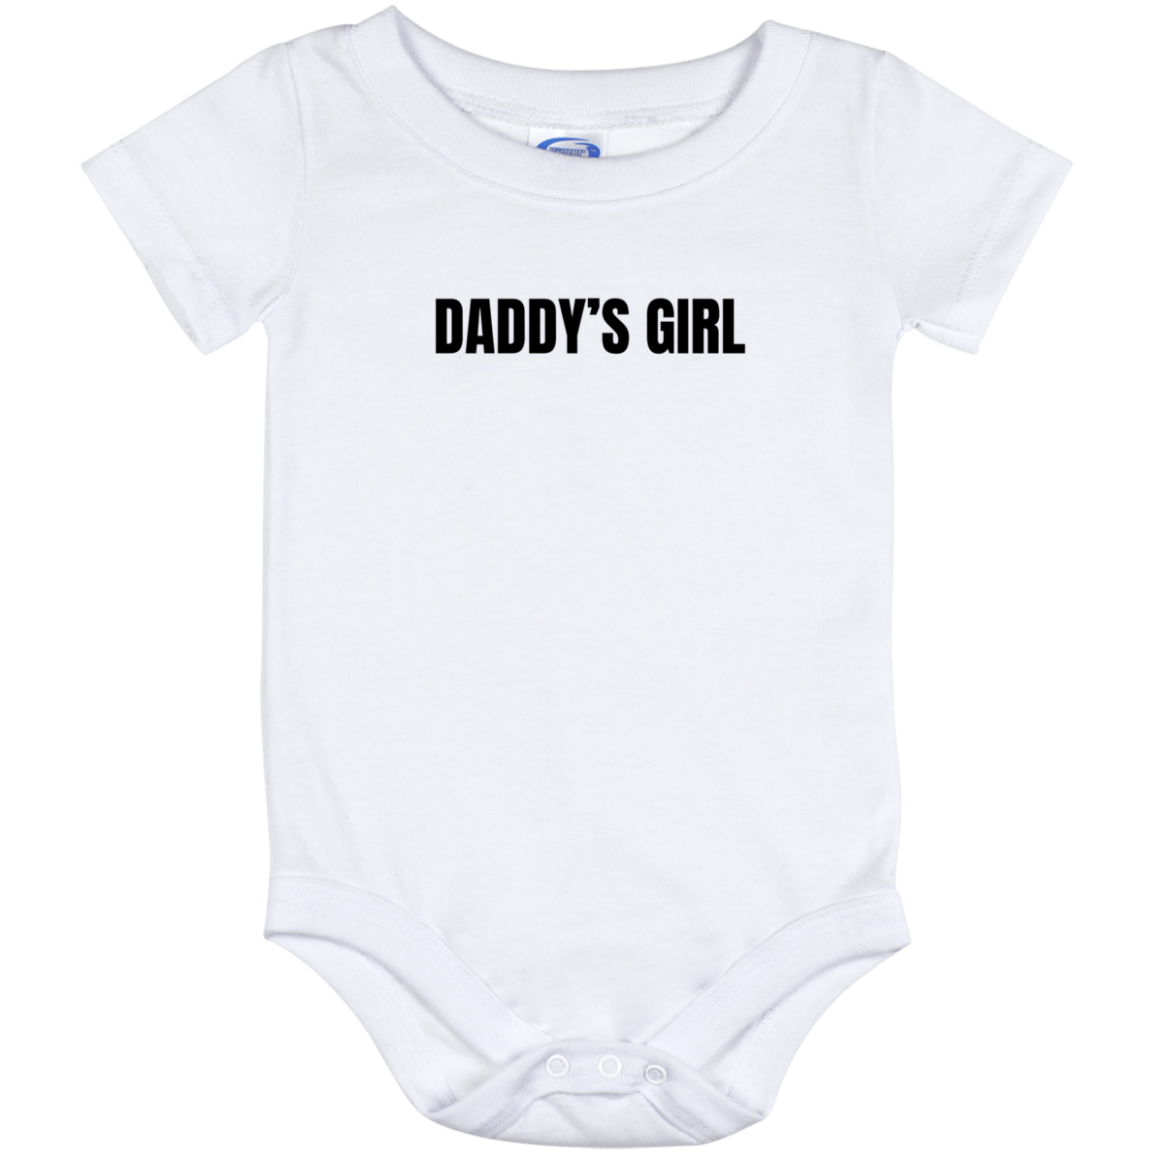 Daddy's Girl - Baby Onesie 6, 12, & 24 Month